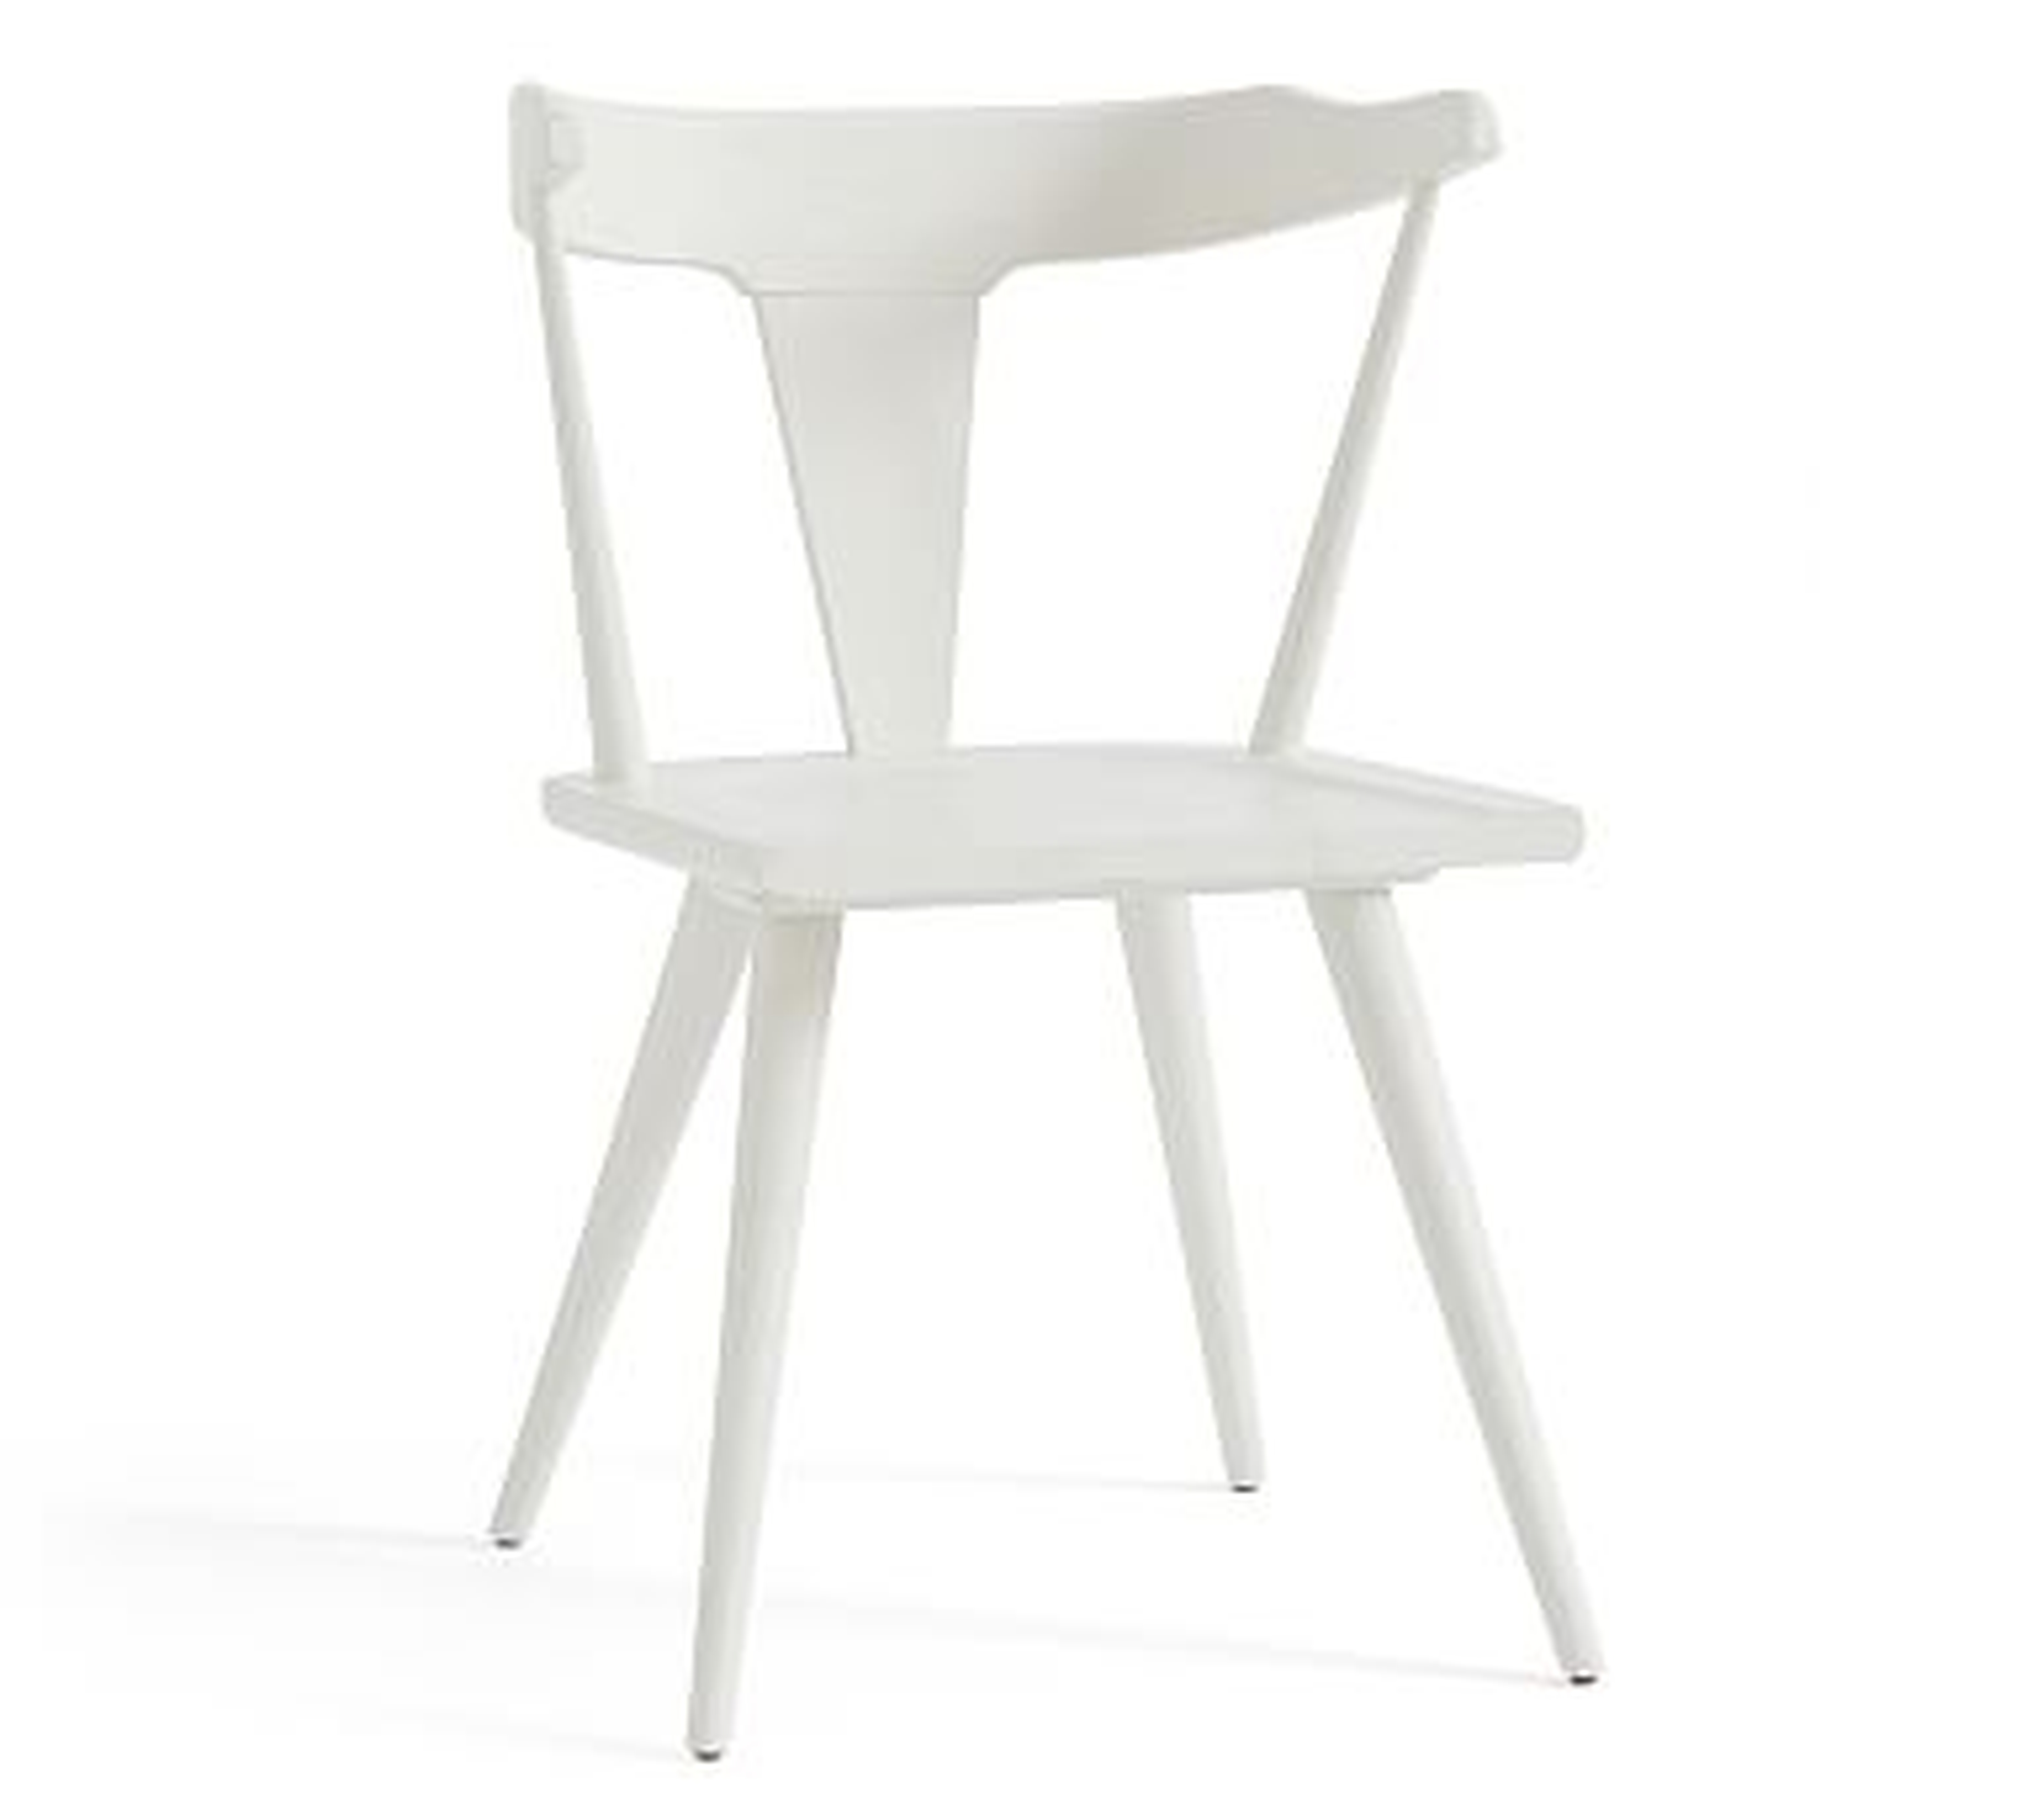 Westan Wood Dining Chair, White - Pottery Barn